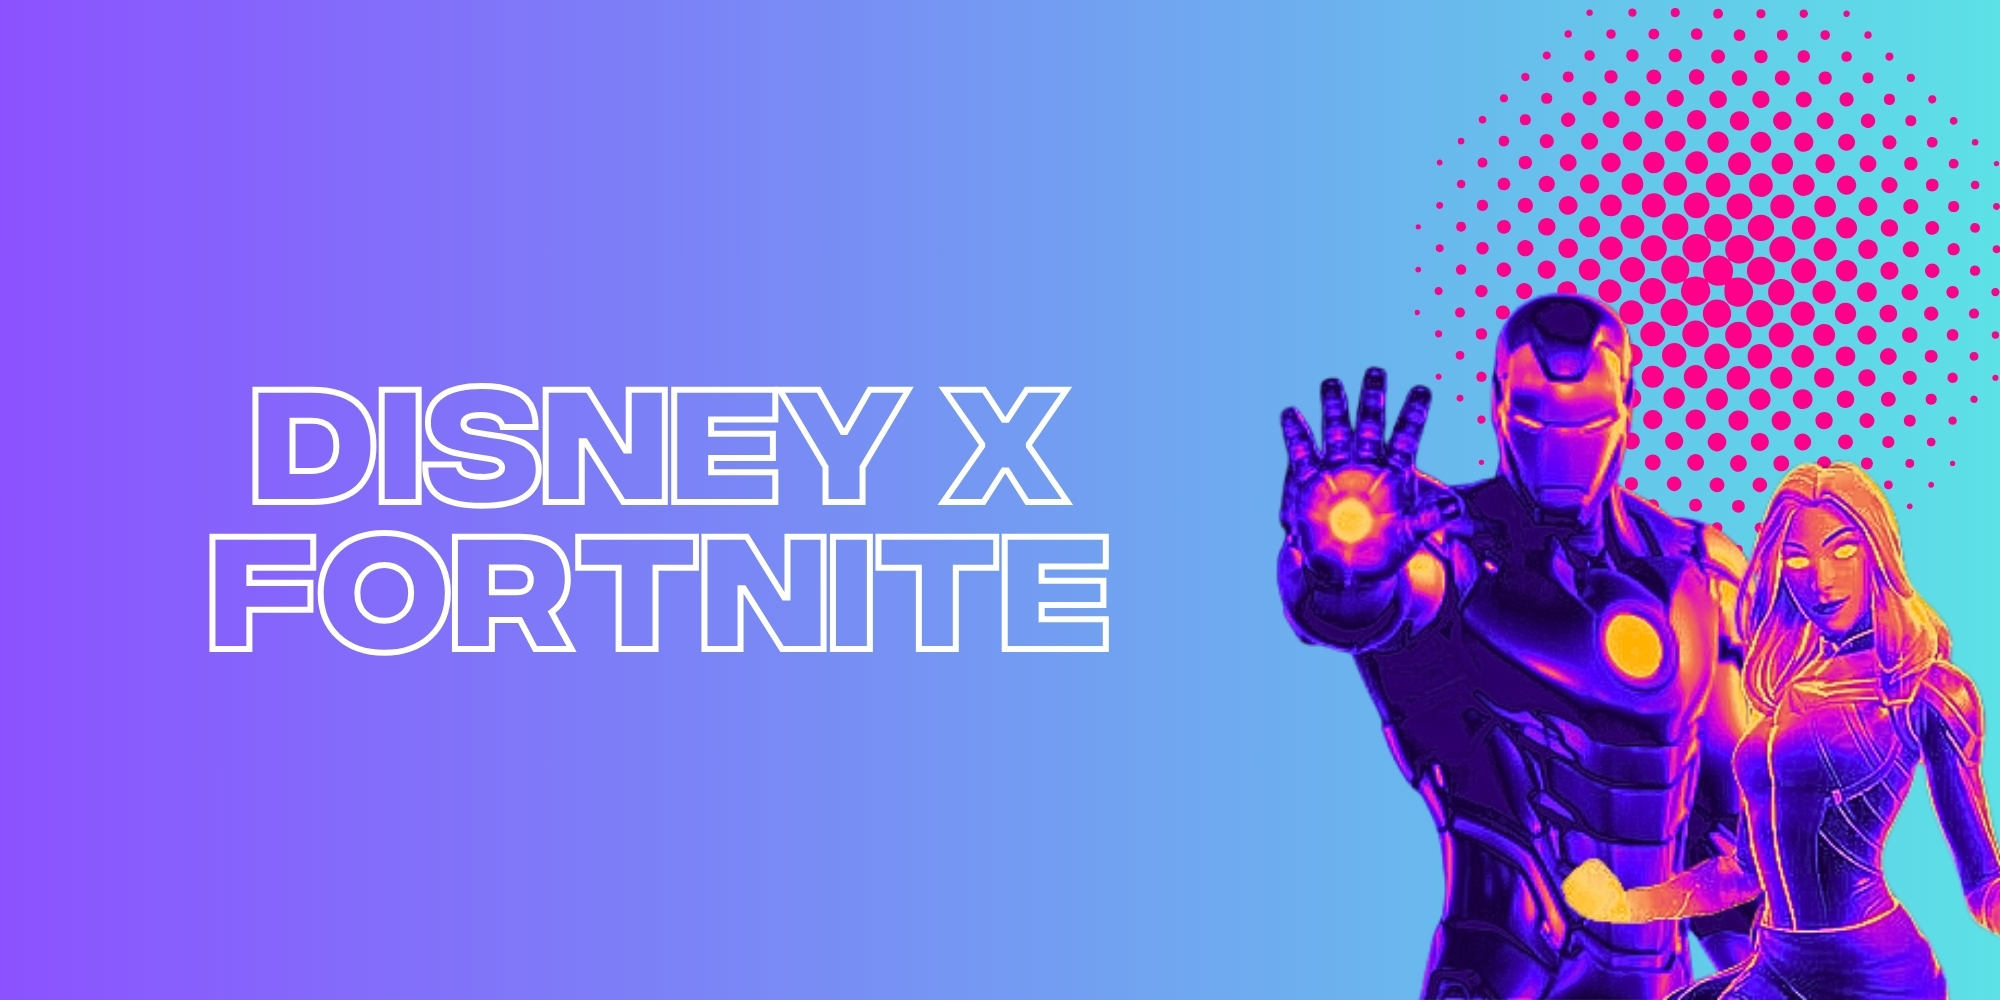 Fortnite News: Disney Buys into Epic Games